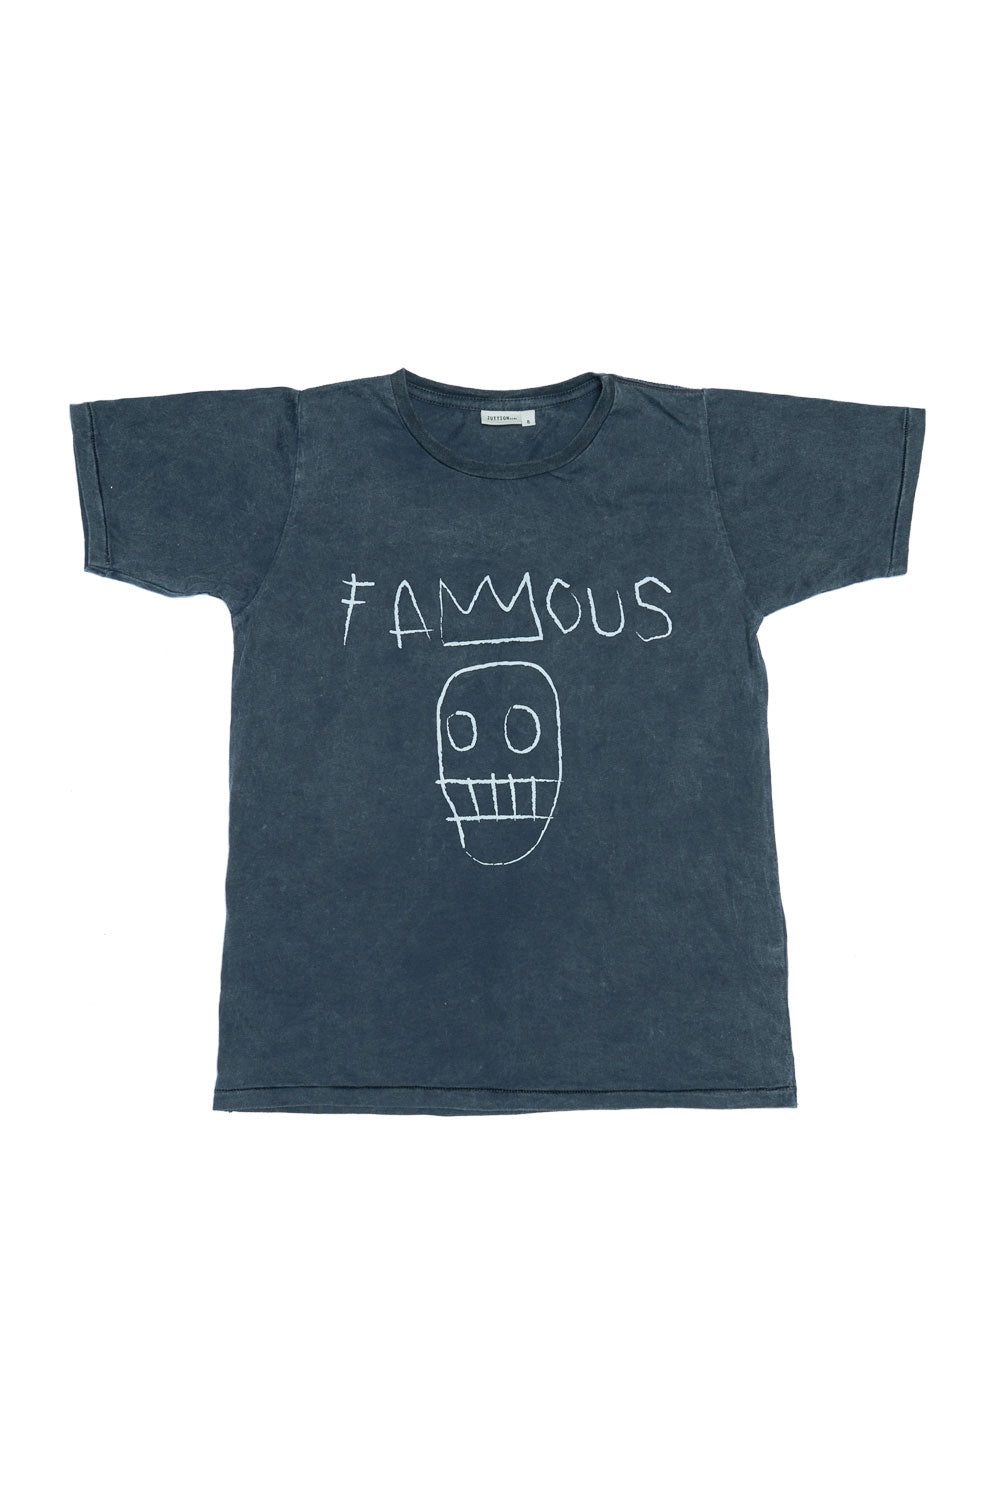 FAMOUS S/S ROUND NECK T CHARCOAL